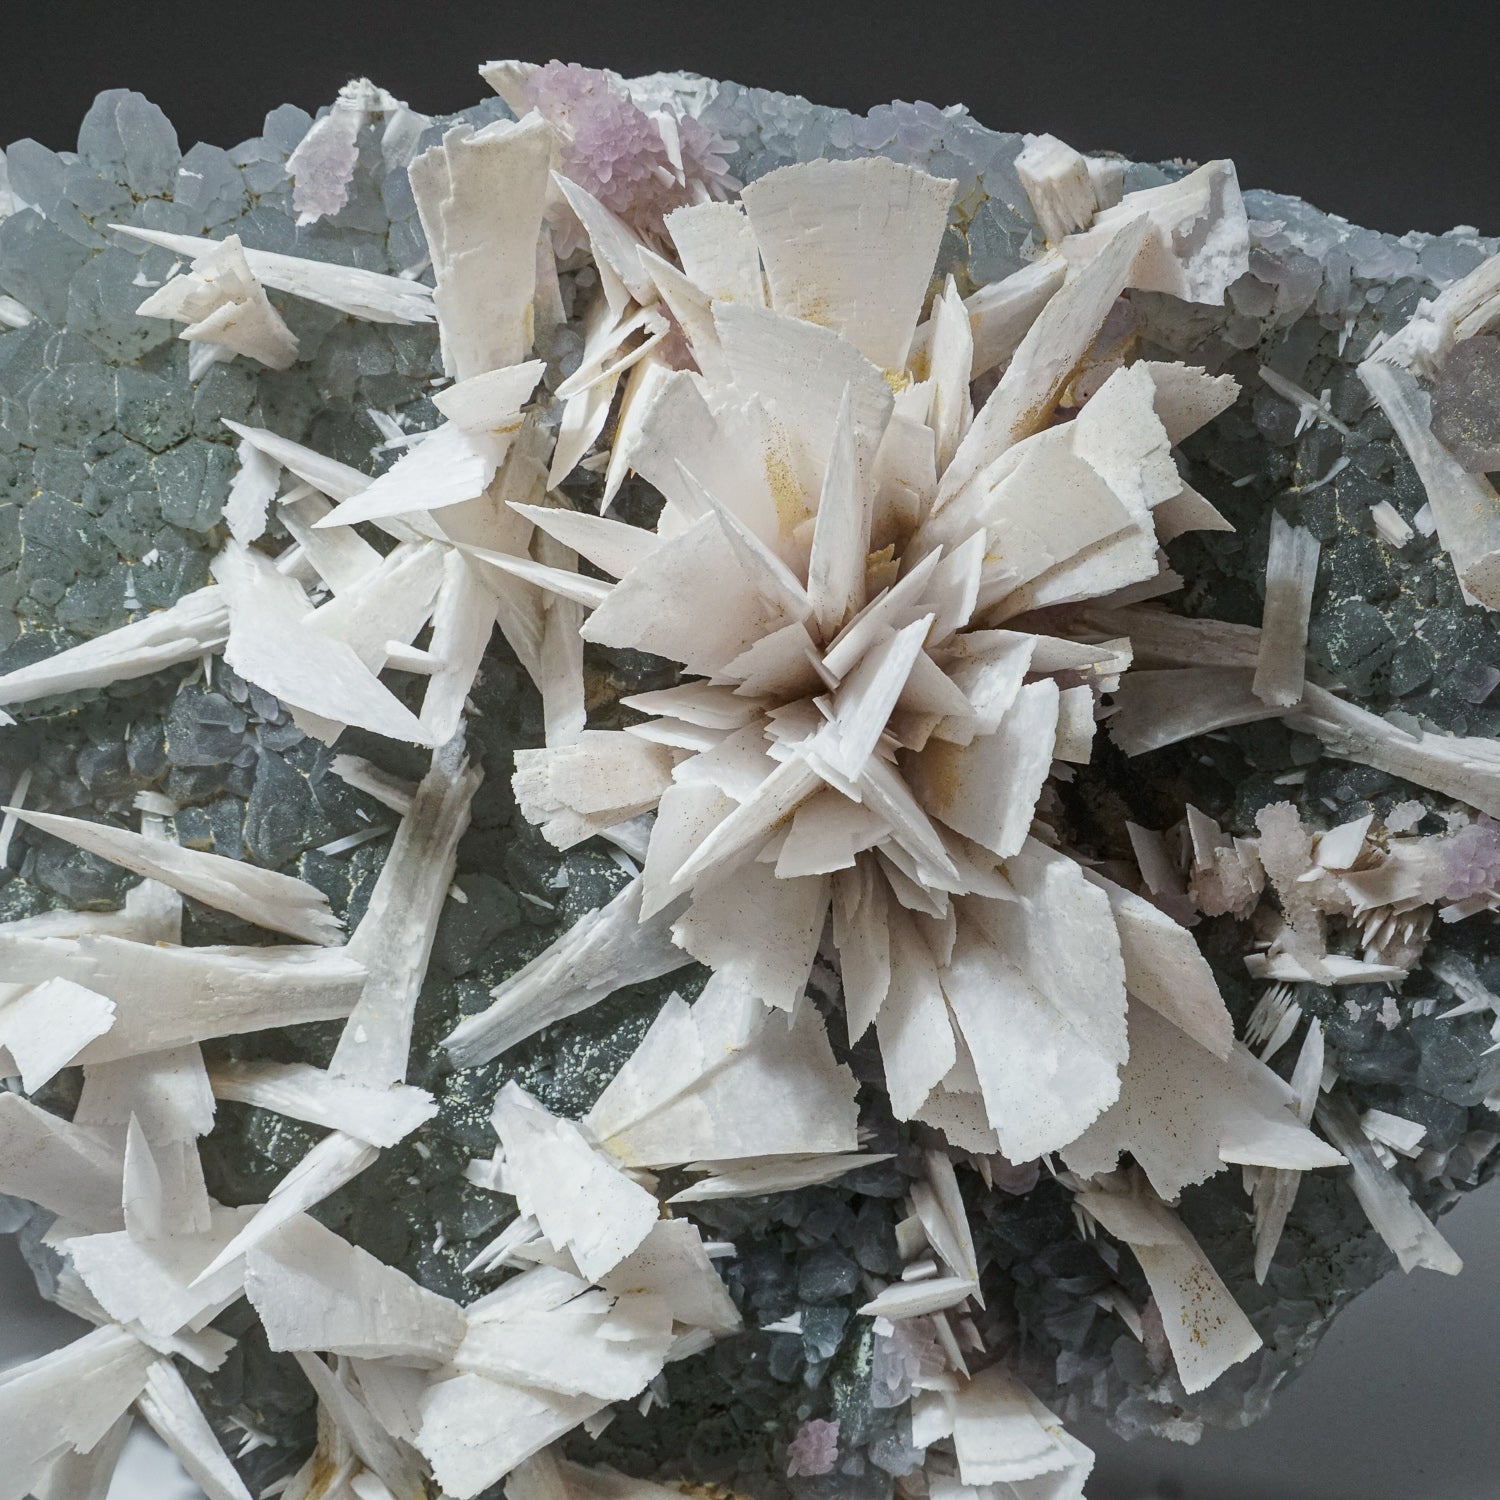 White Anhydrate Crystals on Quartz Matrix from Gerais Mine, Brazil